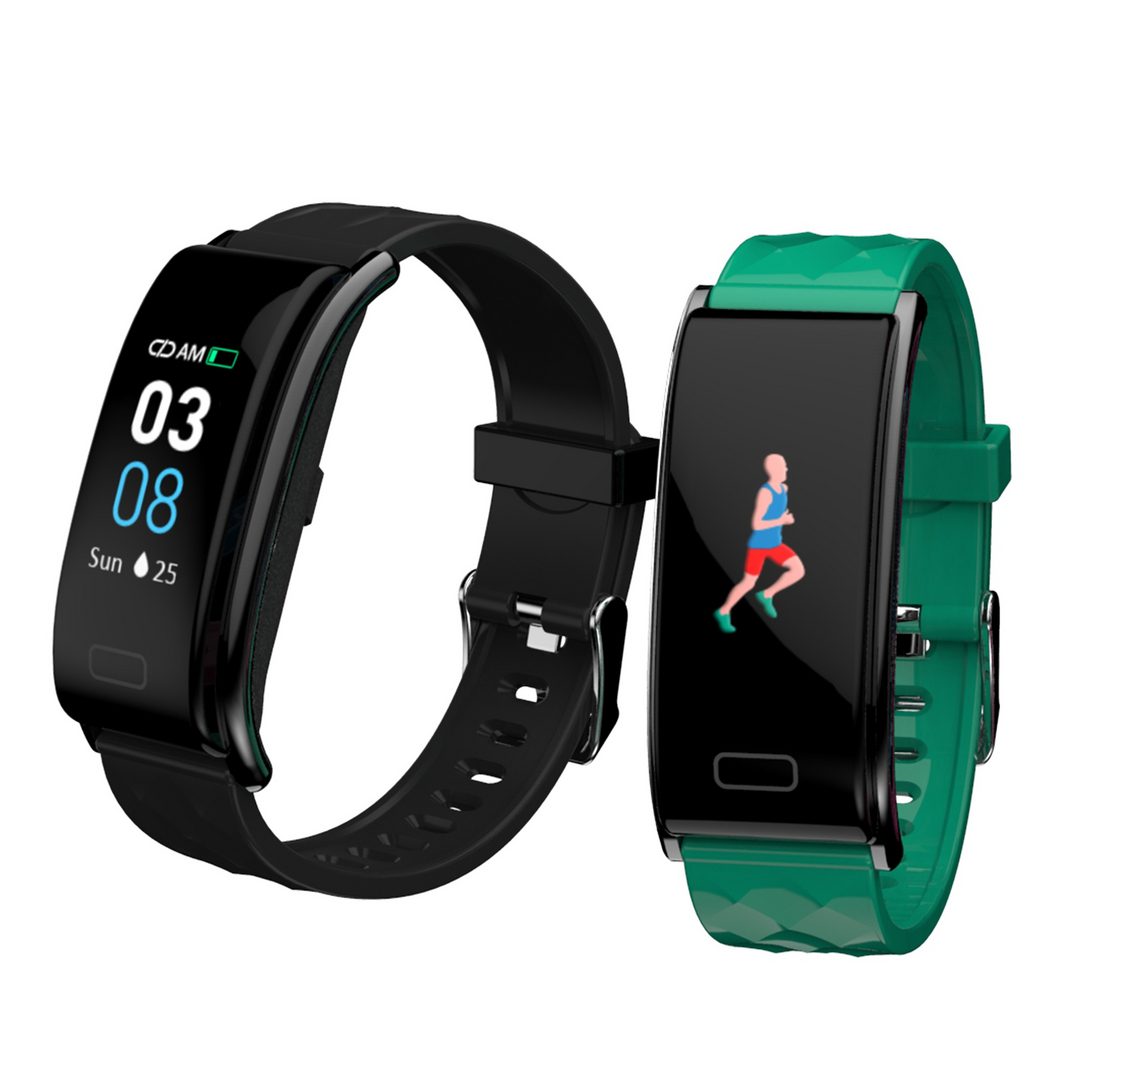 Designer Smartwatches are available at NUIMPACT